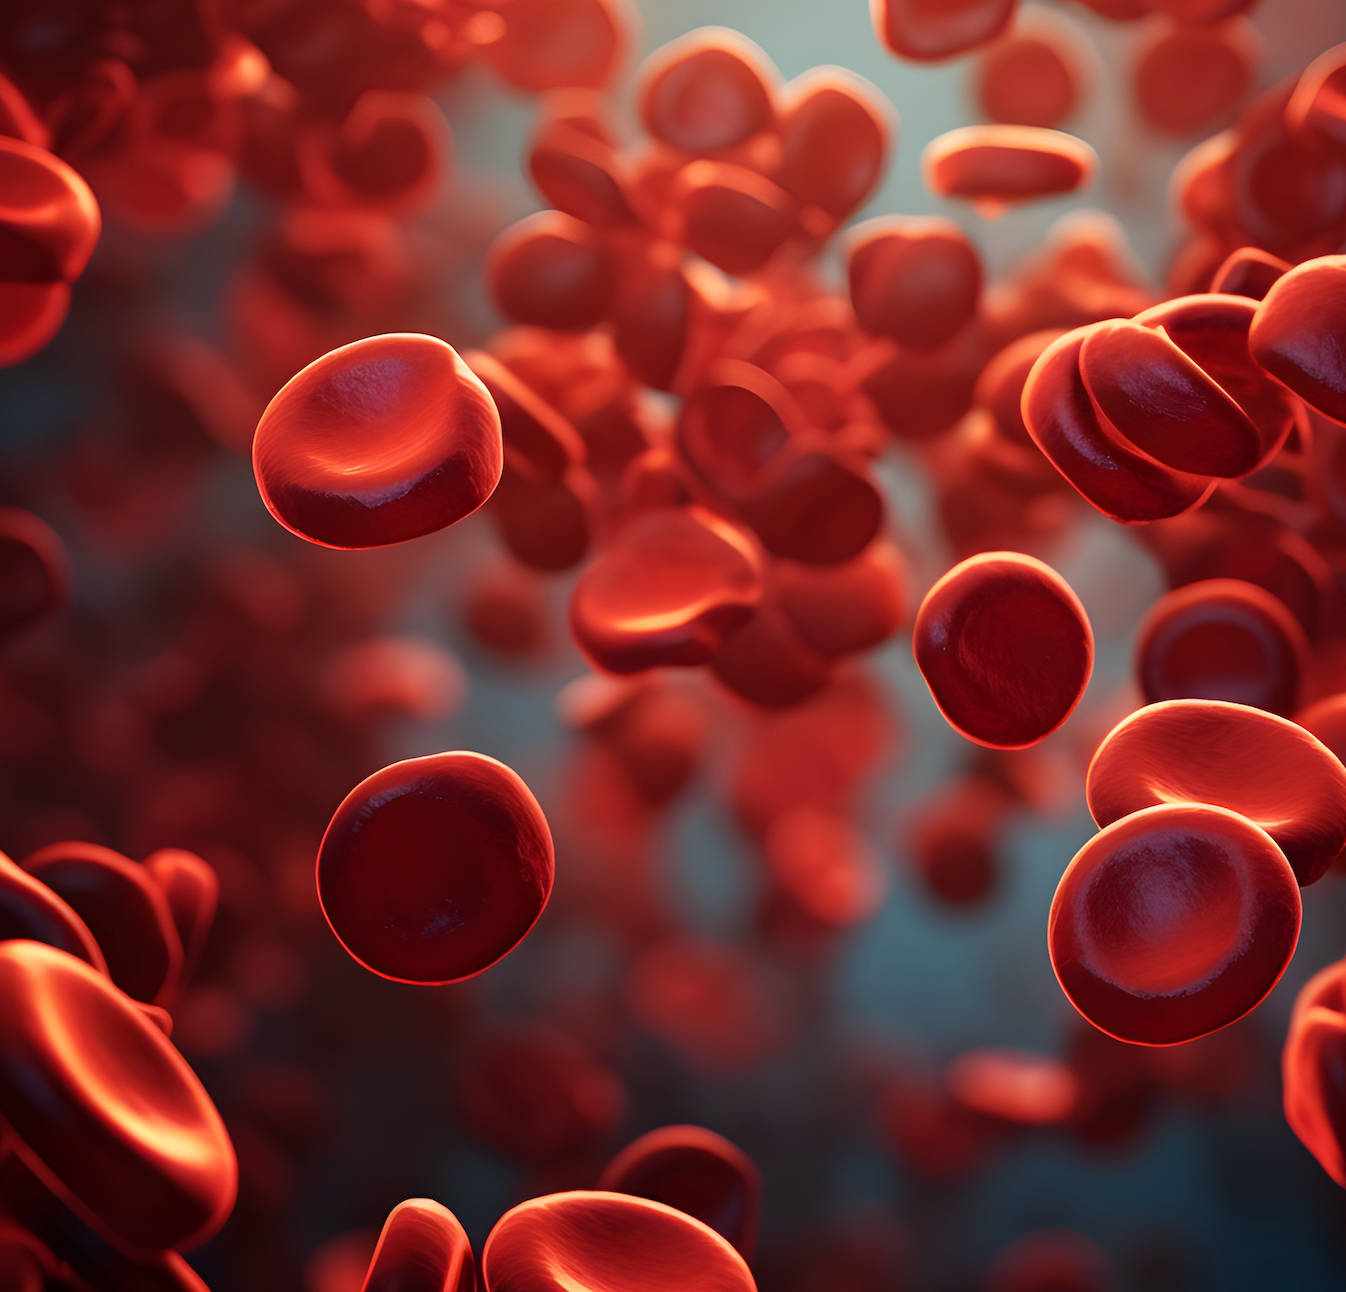 Deeper Anemia Linked to Higher Risk of Bleeding, Stroke in Patients Treated with Warfarin 